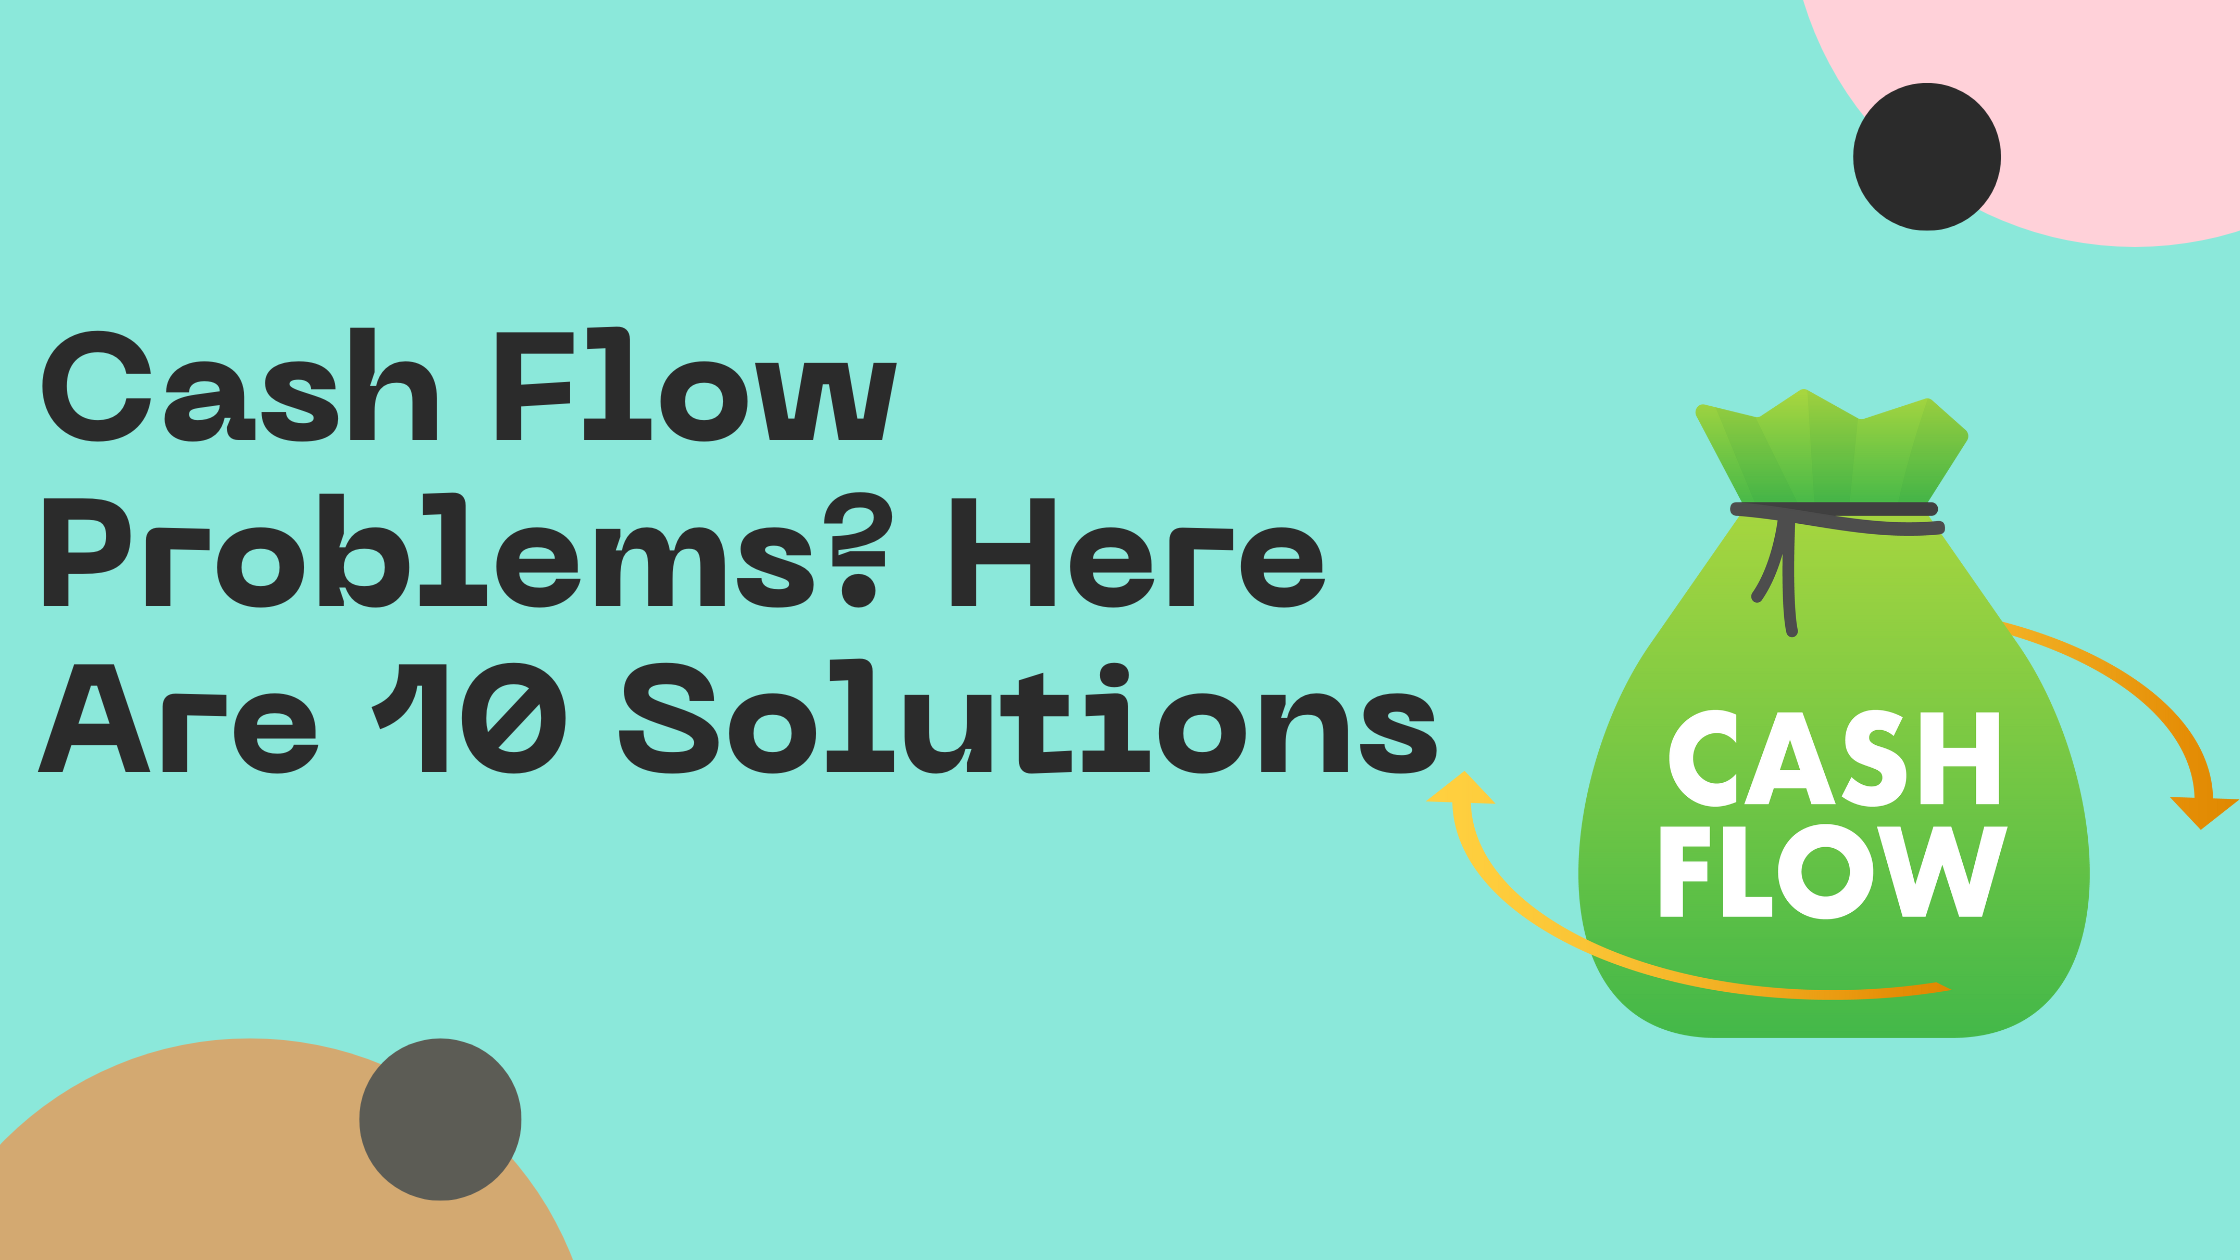 Cash Flow Problems? Here Are 10 Solutions